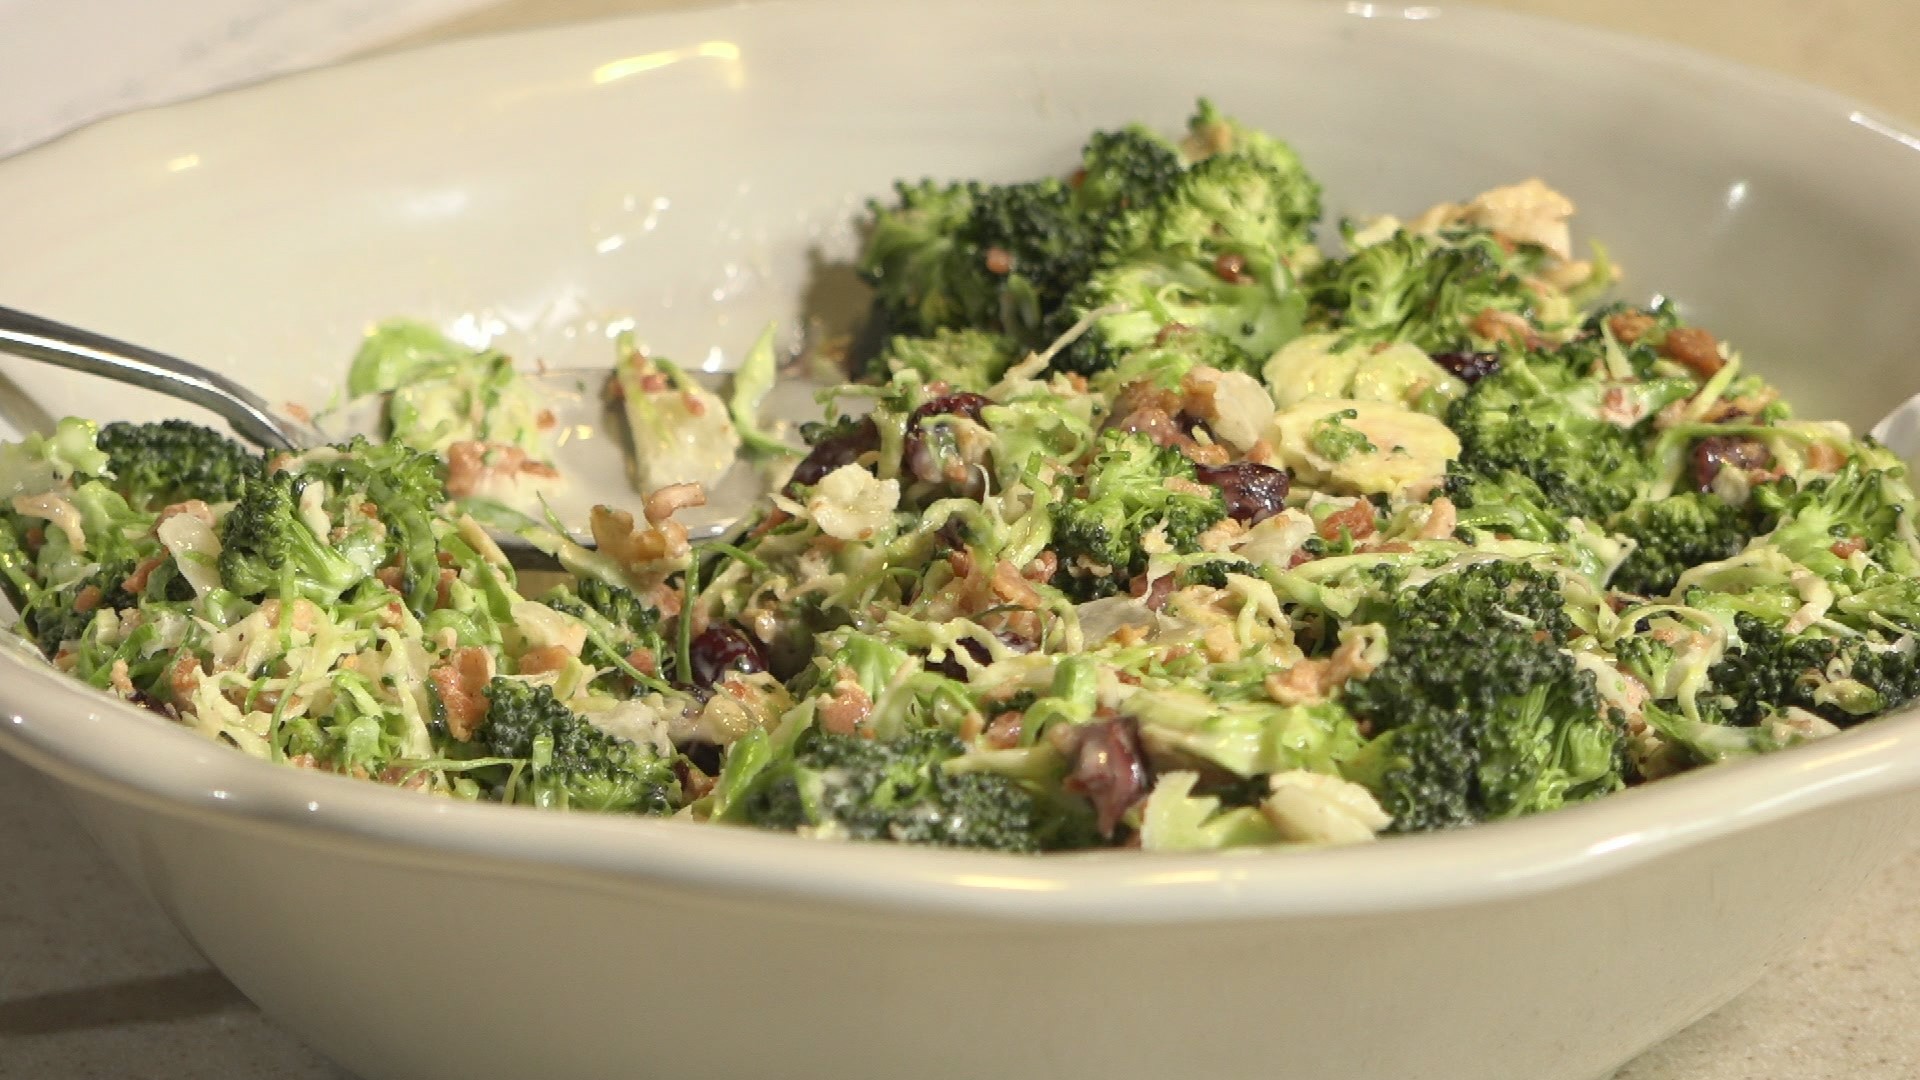 Cook and Author Suzanne Johnson makes some B&B salad that's easy to make for a holiday party.